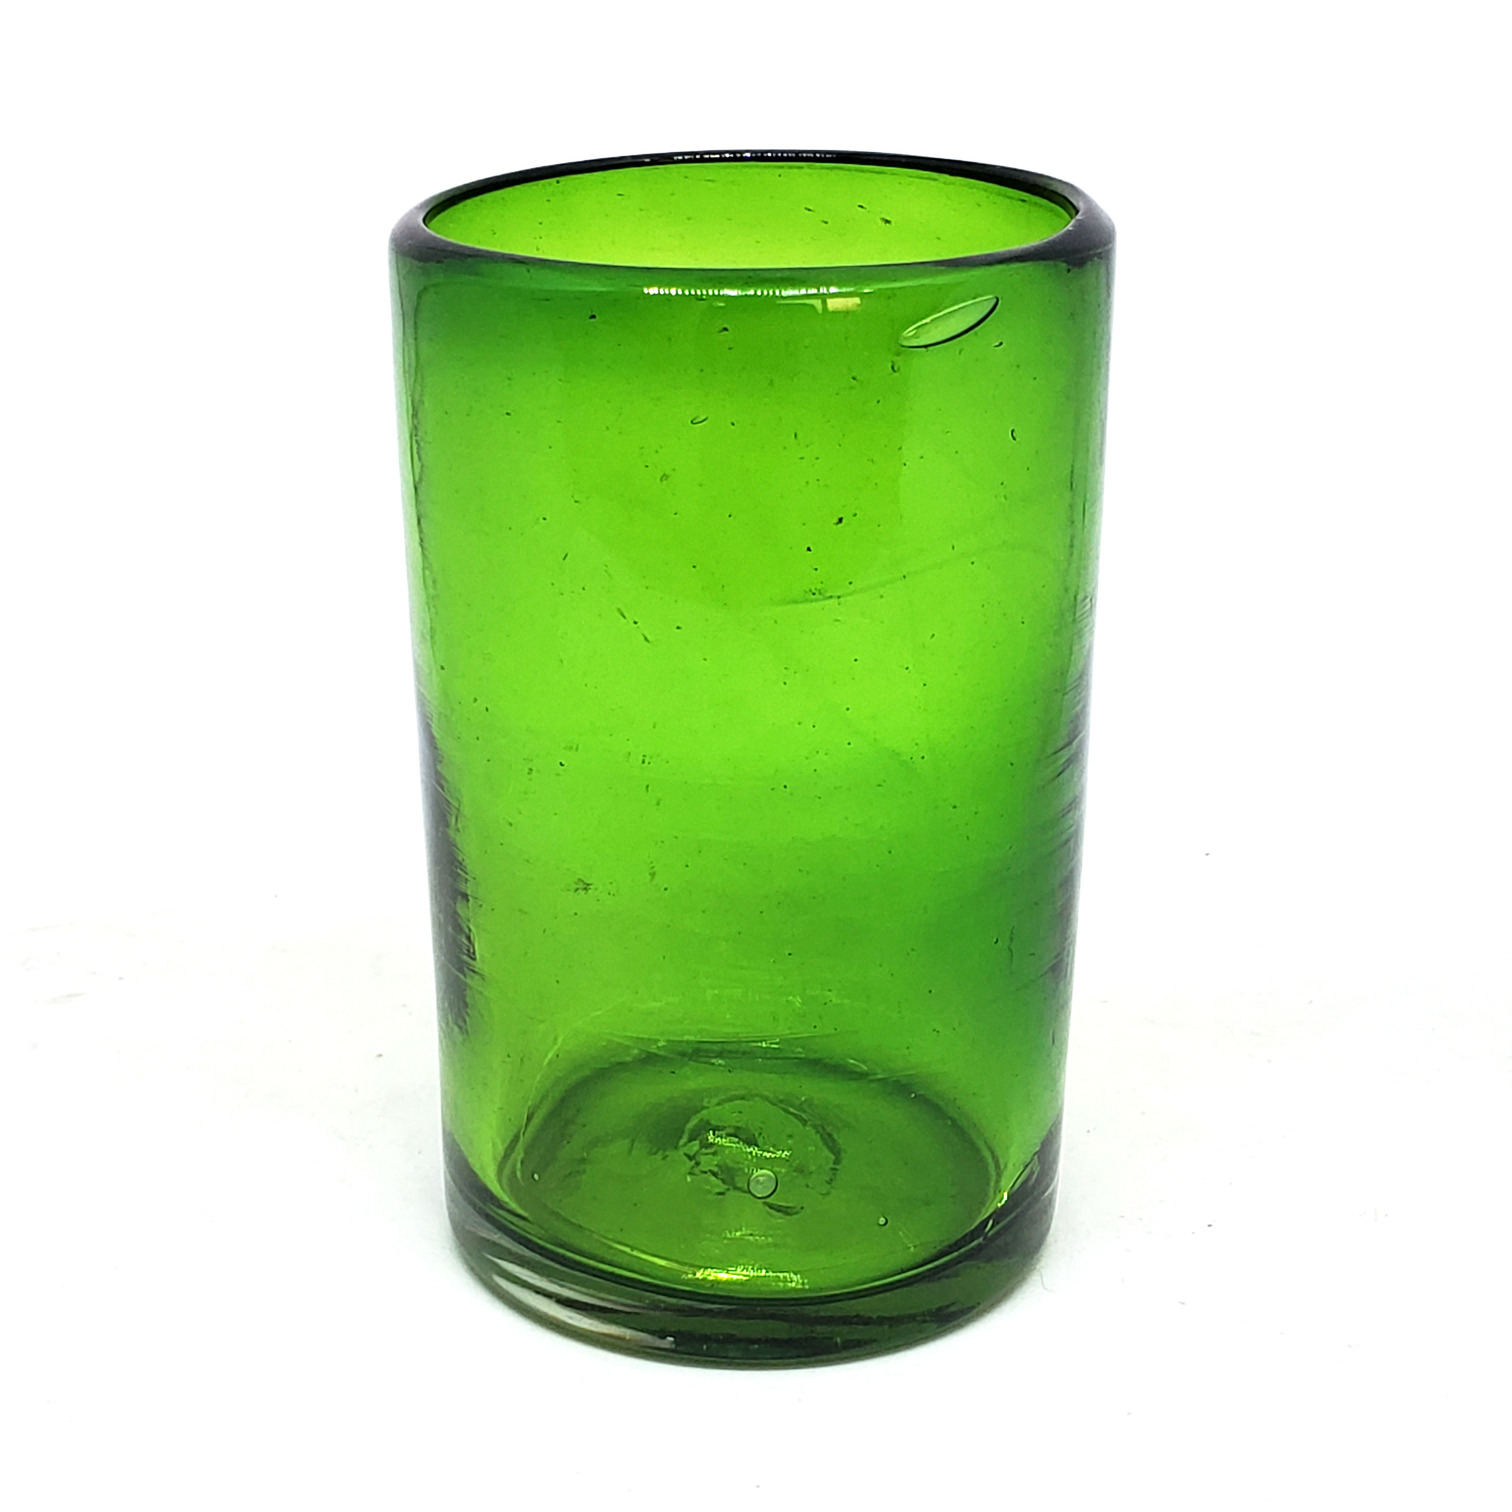 New Items / Solid Emerald Green 14 oz Drinking Glasses (set of 6) / These handcrafted glasses deliver a classic touch to your favorite drink.